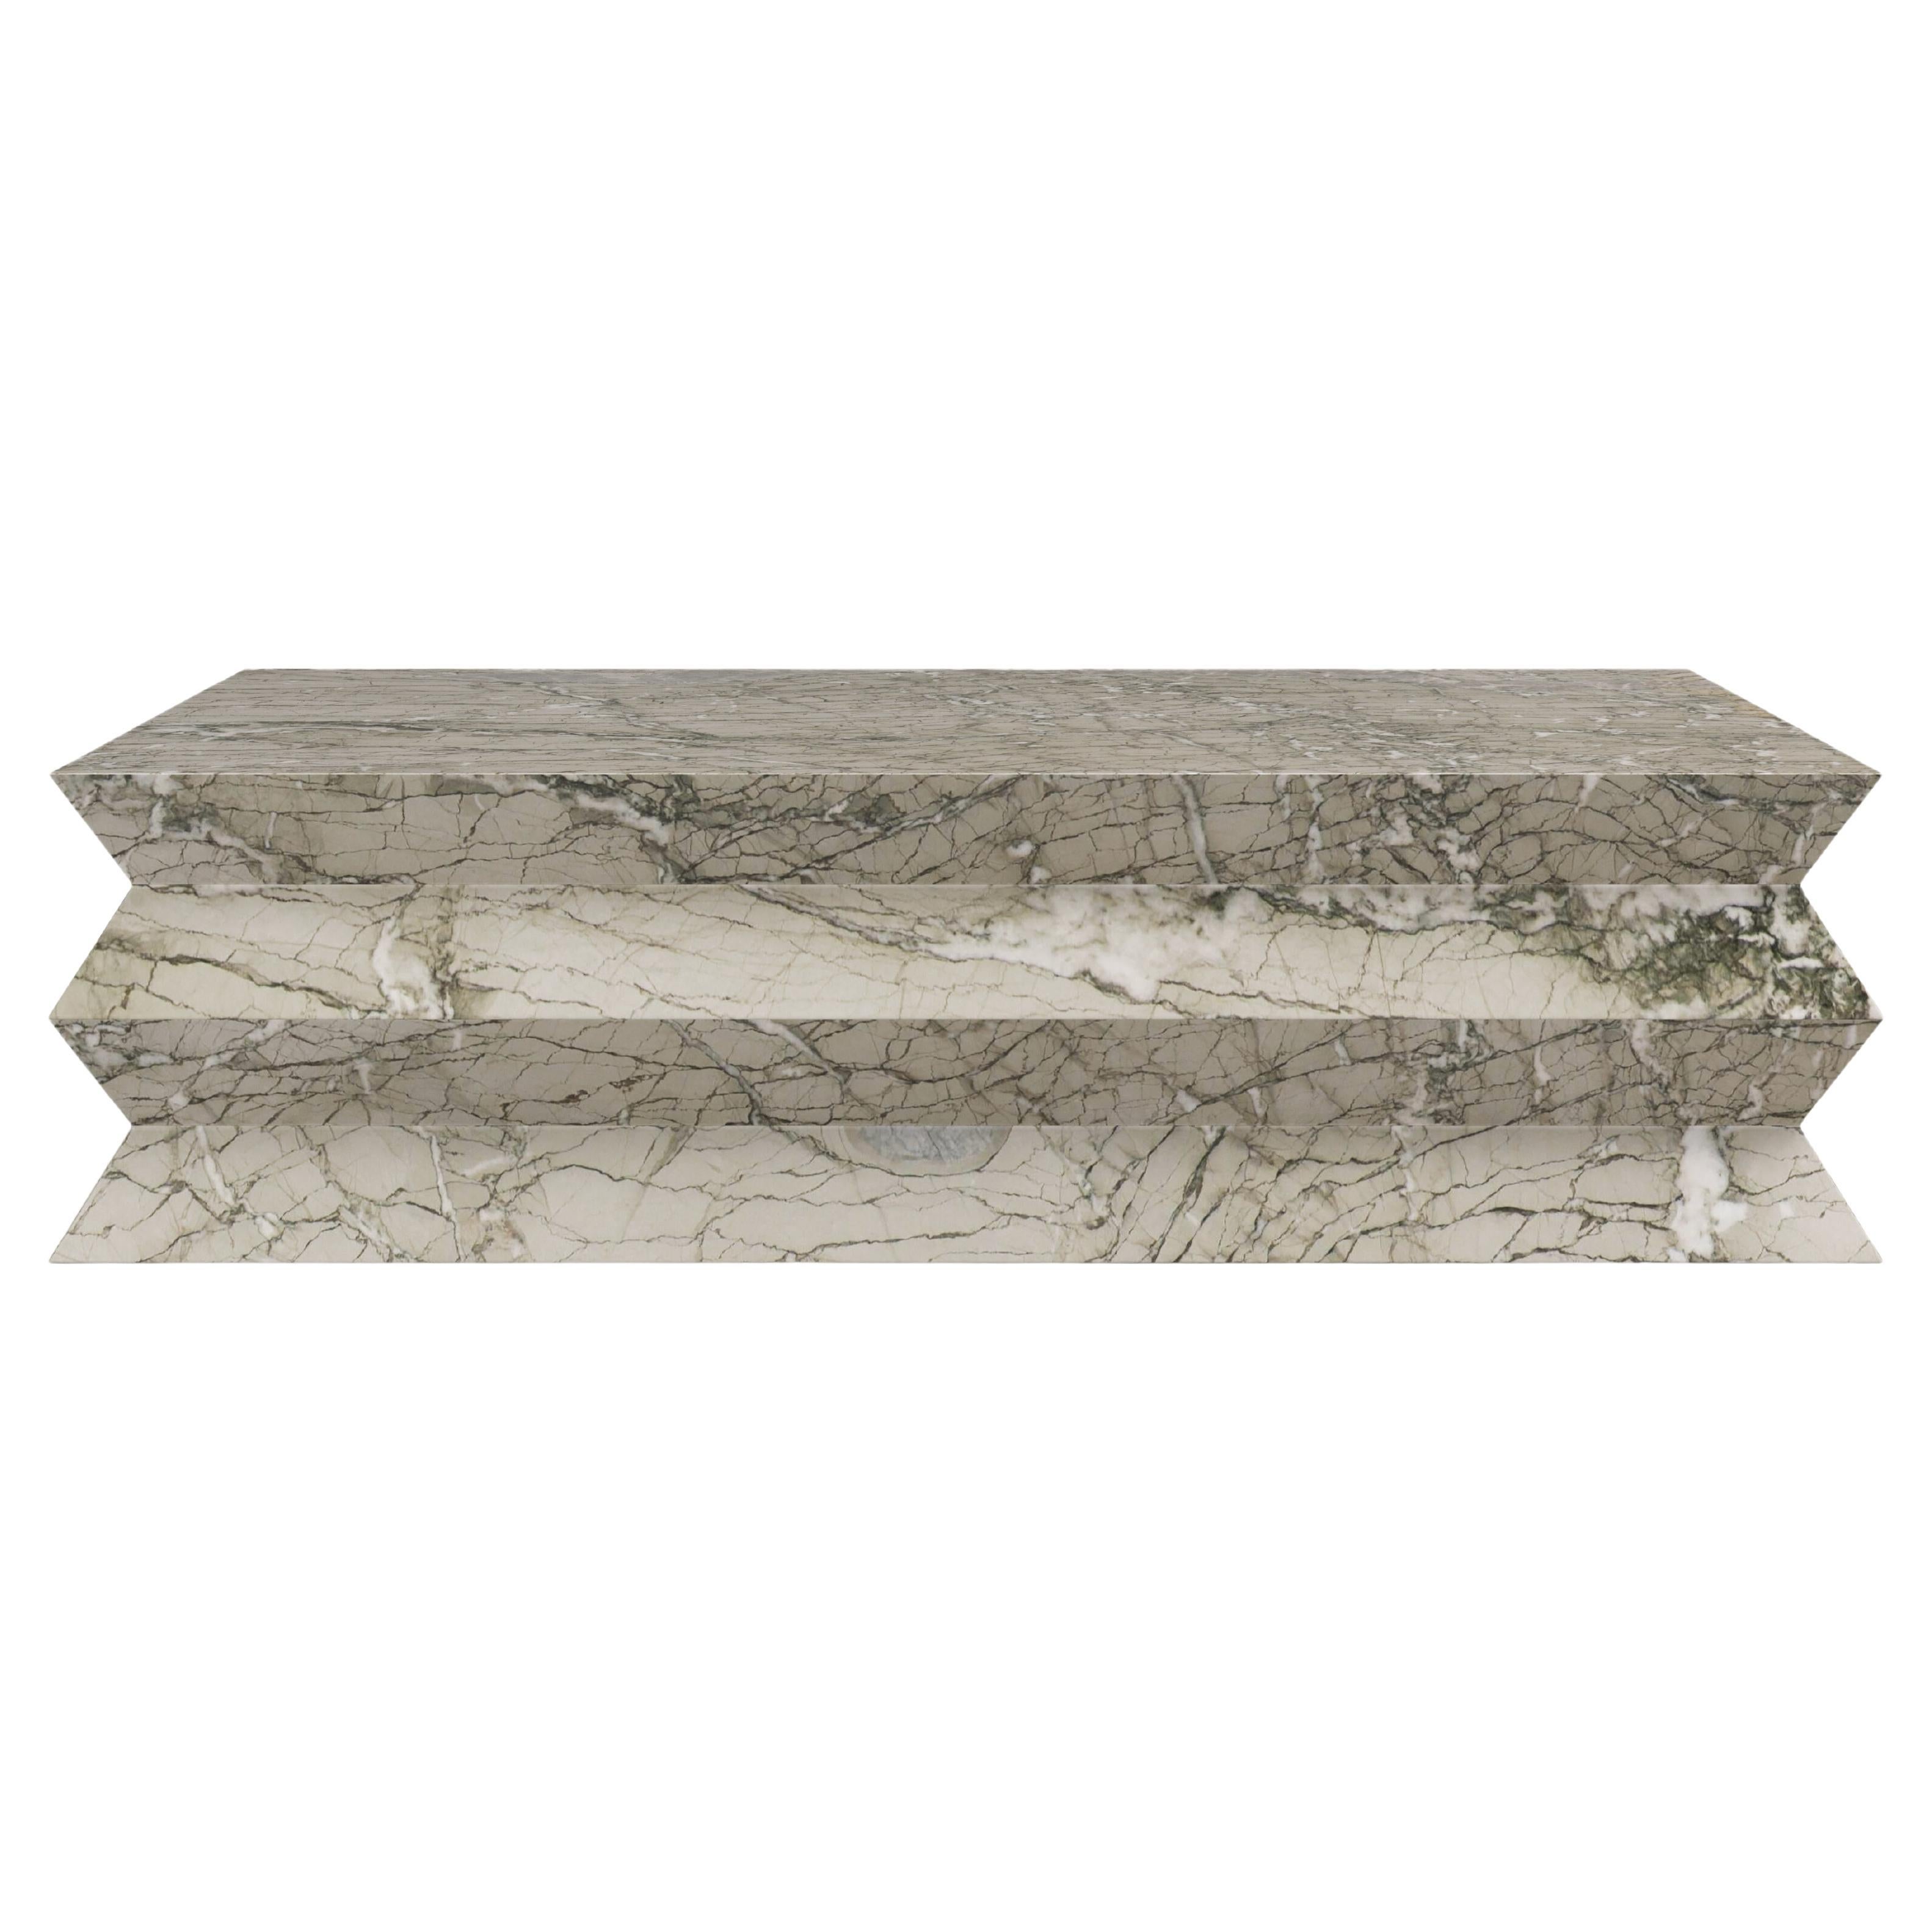 FORM(LA) Grinza Rectangle Coffee Table 72"L x 42"W x 16"H Verde Antigua Marble For Sale